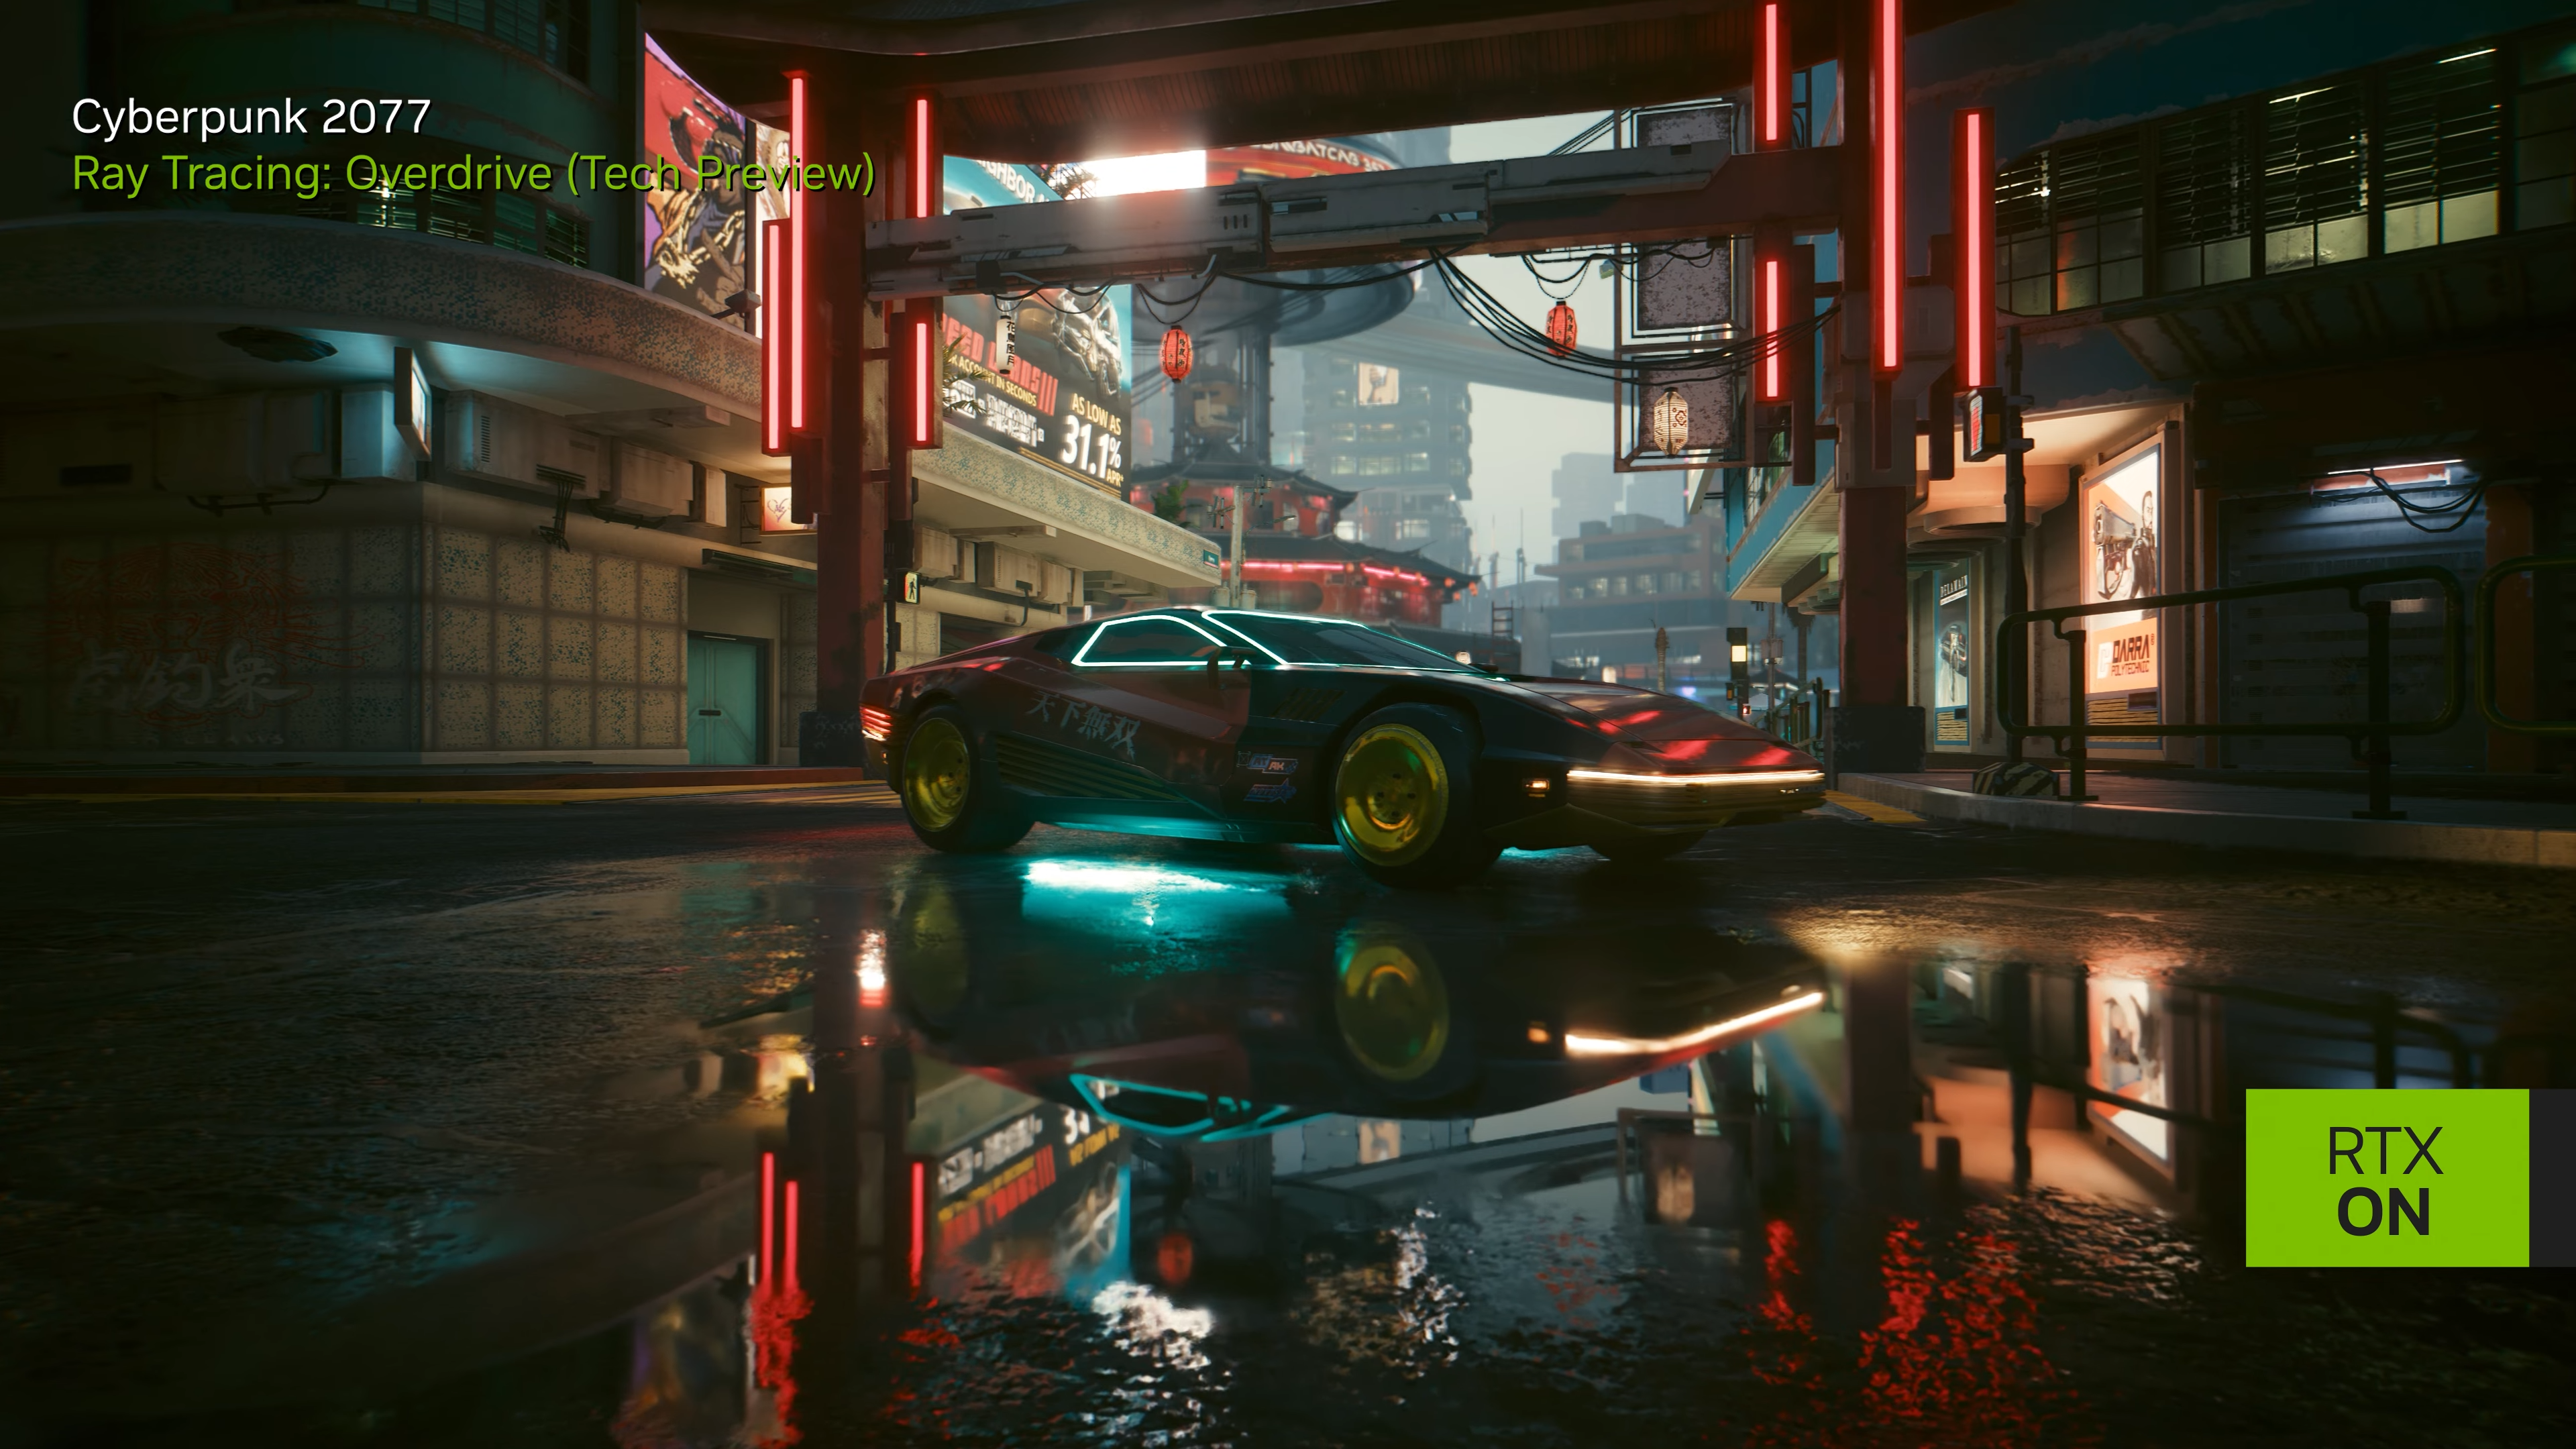 Cyberpunk 2077 RT Overdrive - Ray Tracing vs Path Tracing image quality and  performance comparison running on RTX 4080 at 4K : r/nvidia